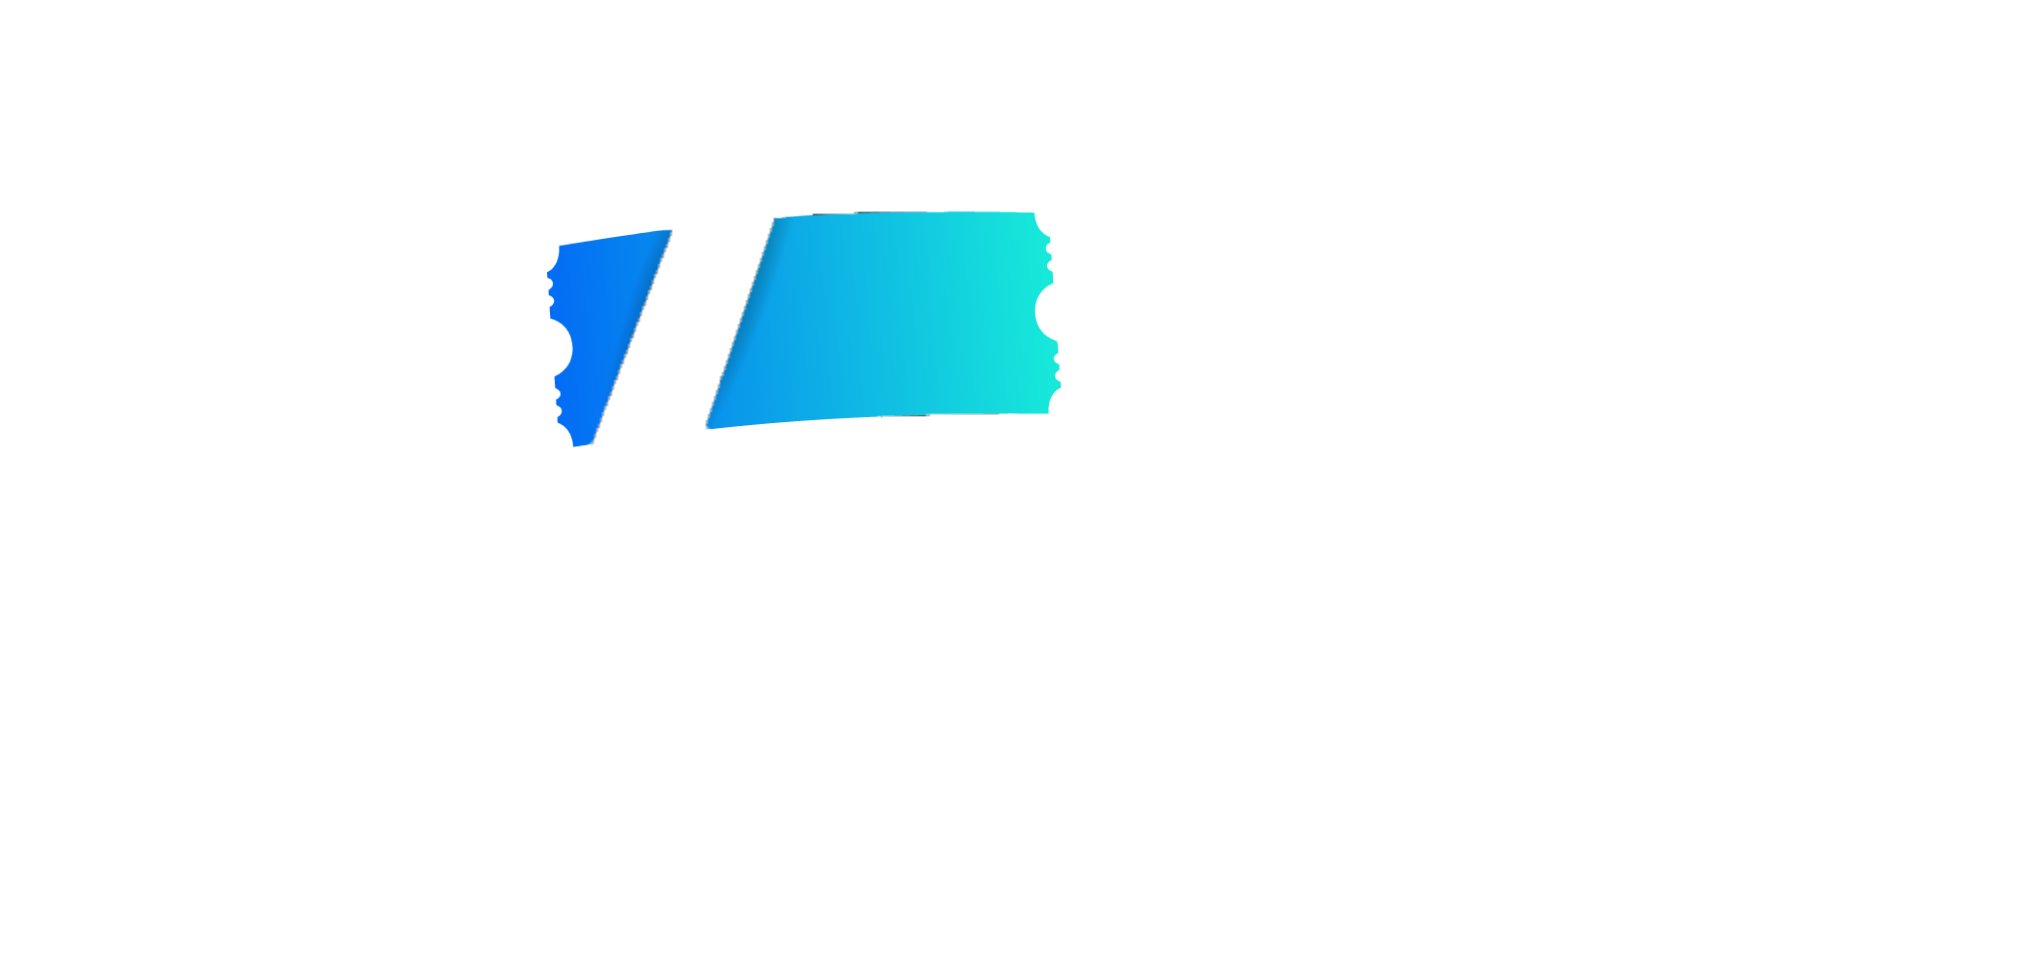 The National Association of Ticket Brokers